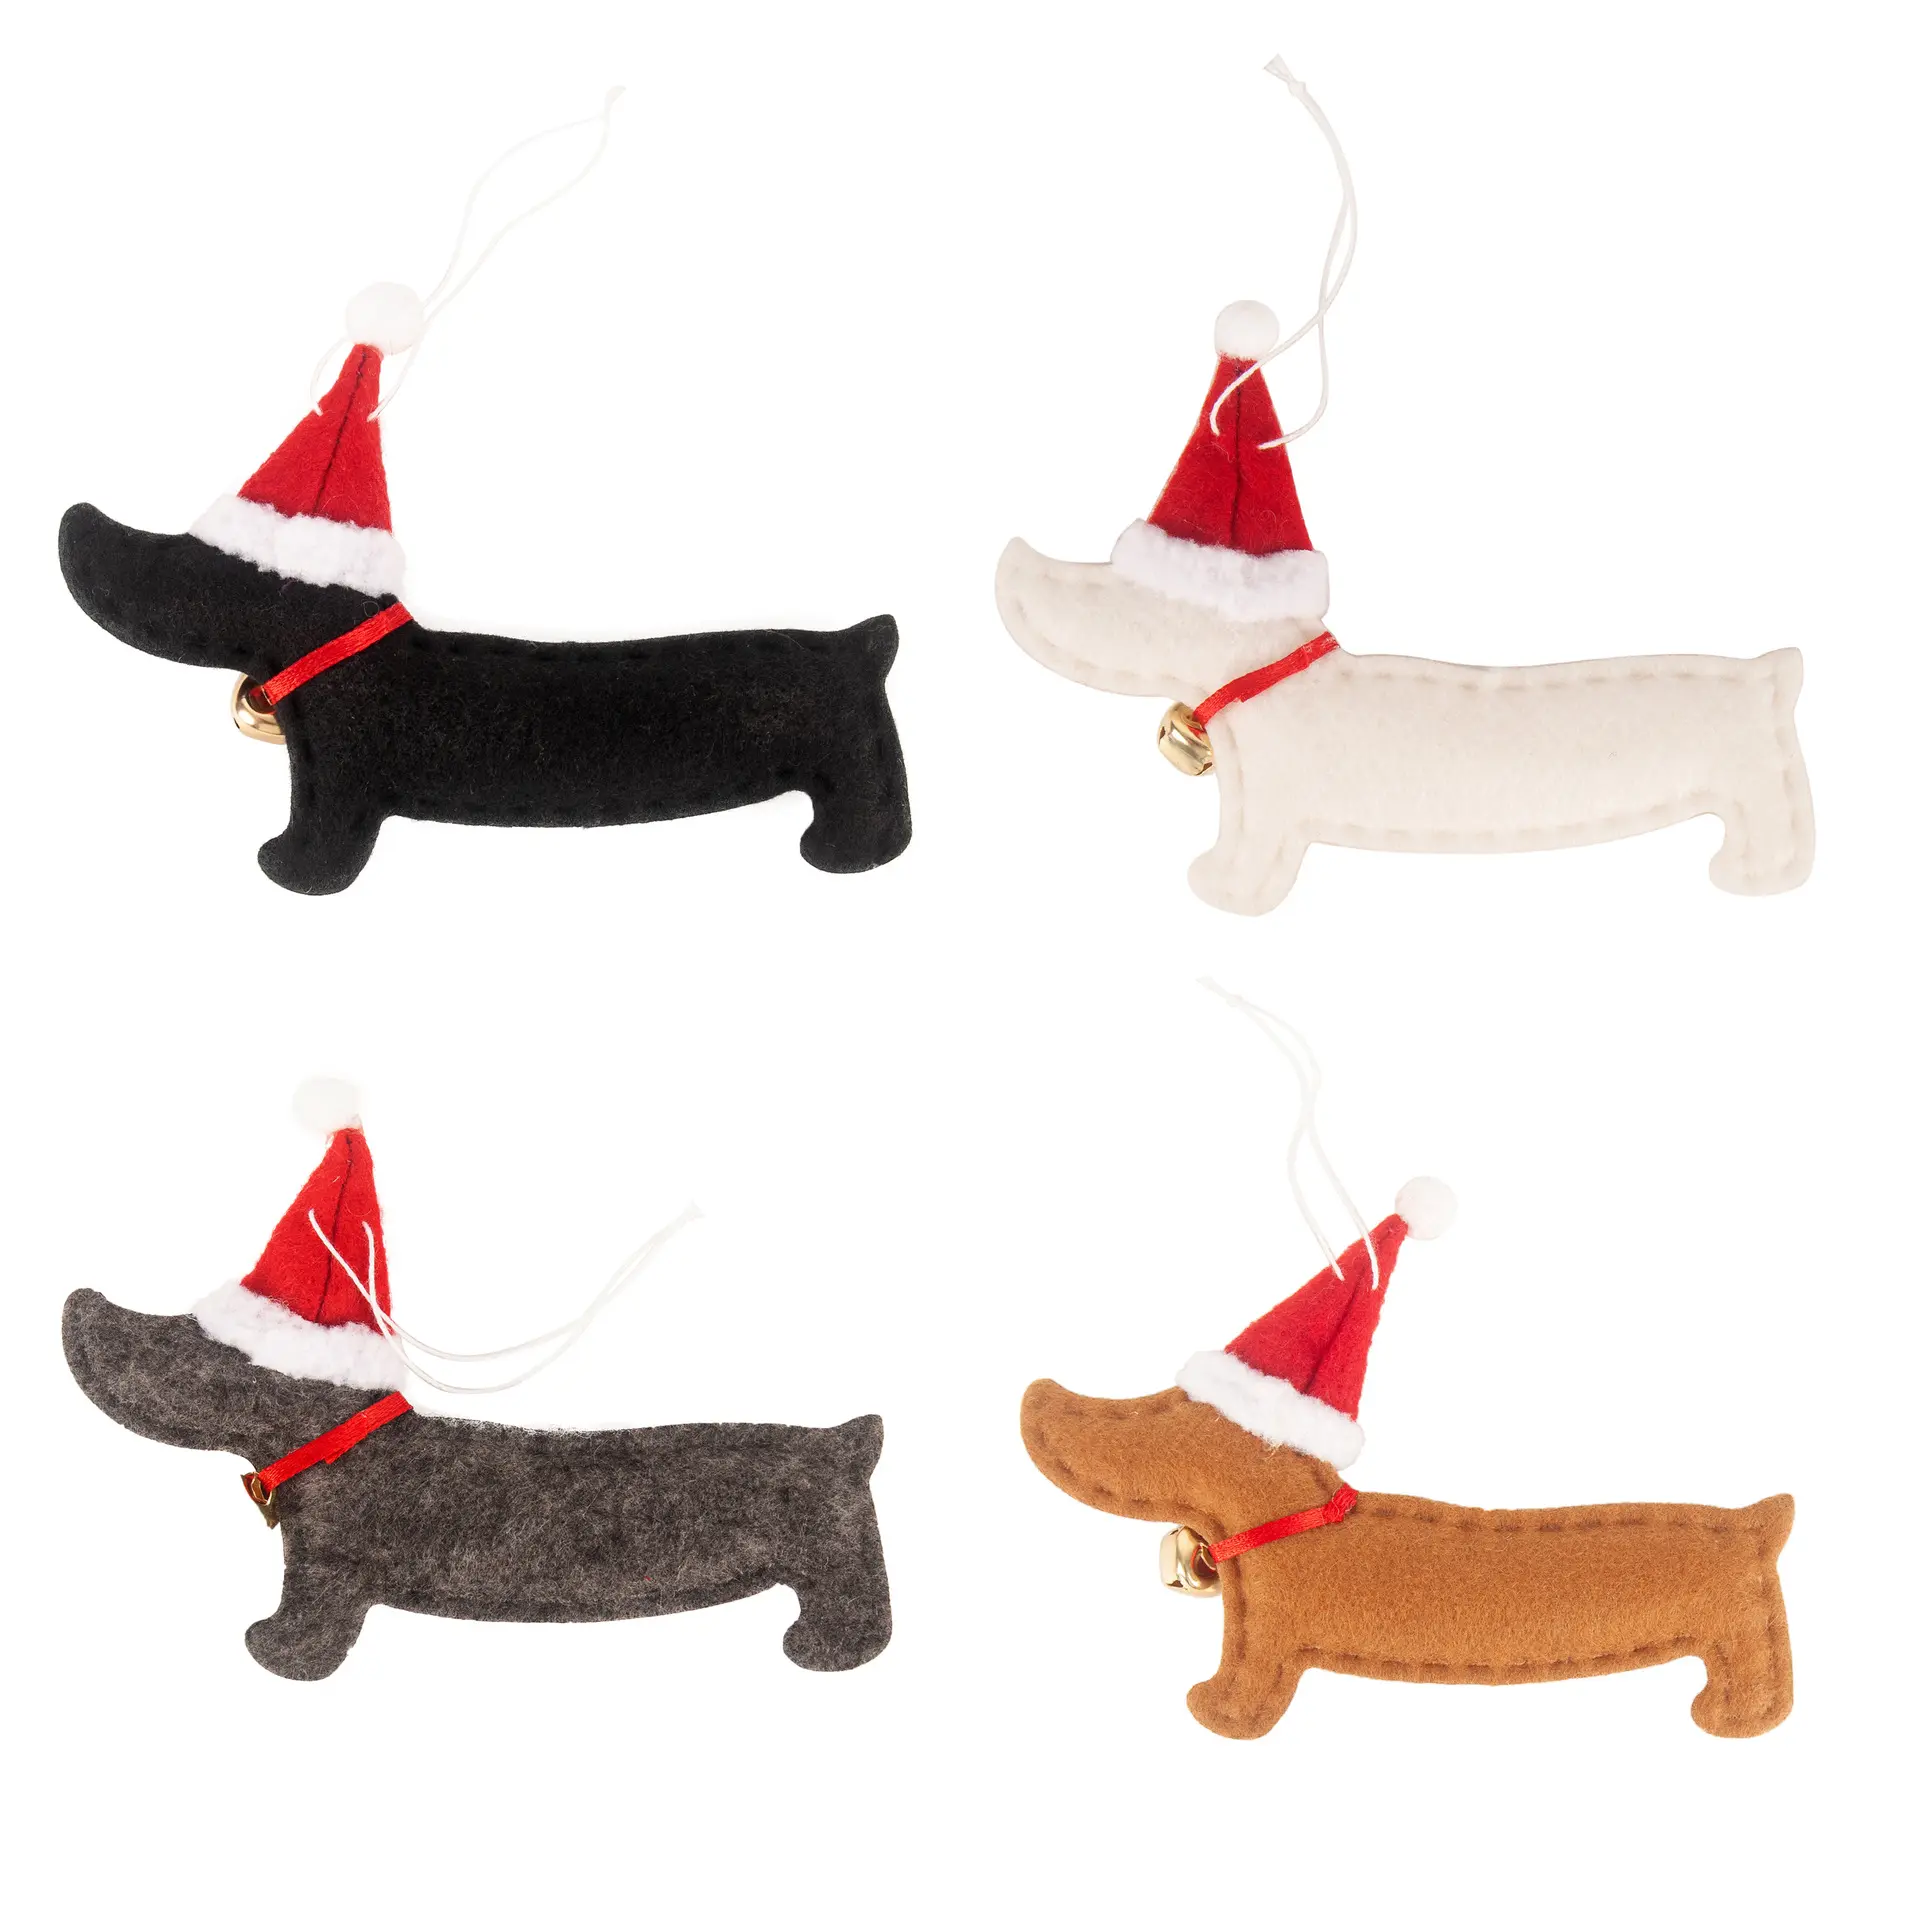 Merry Christmas Decoration Supplies Novelty Party Hanging Cute Puppy Dog Home Christmas Tree Ornament